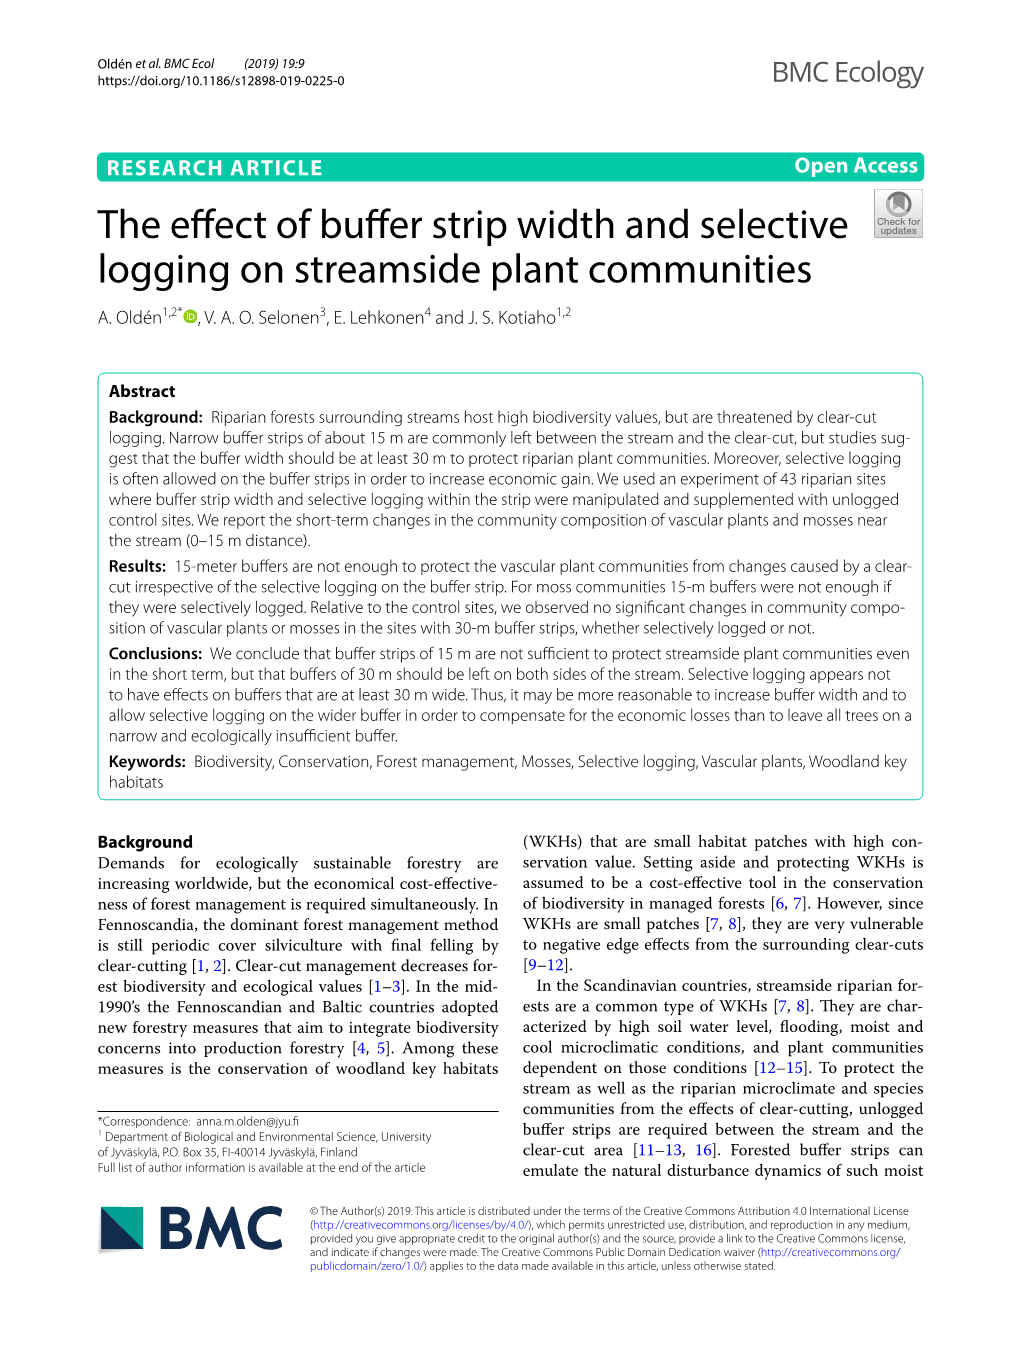 The Effect of Buffer Strip Width and Selective Logging on Streamside